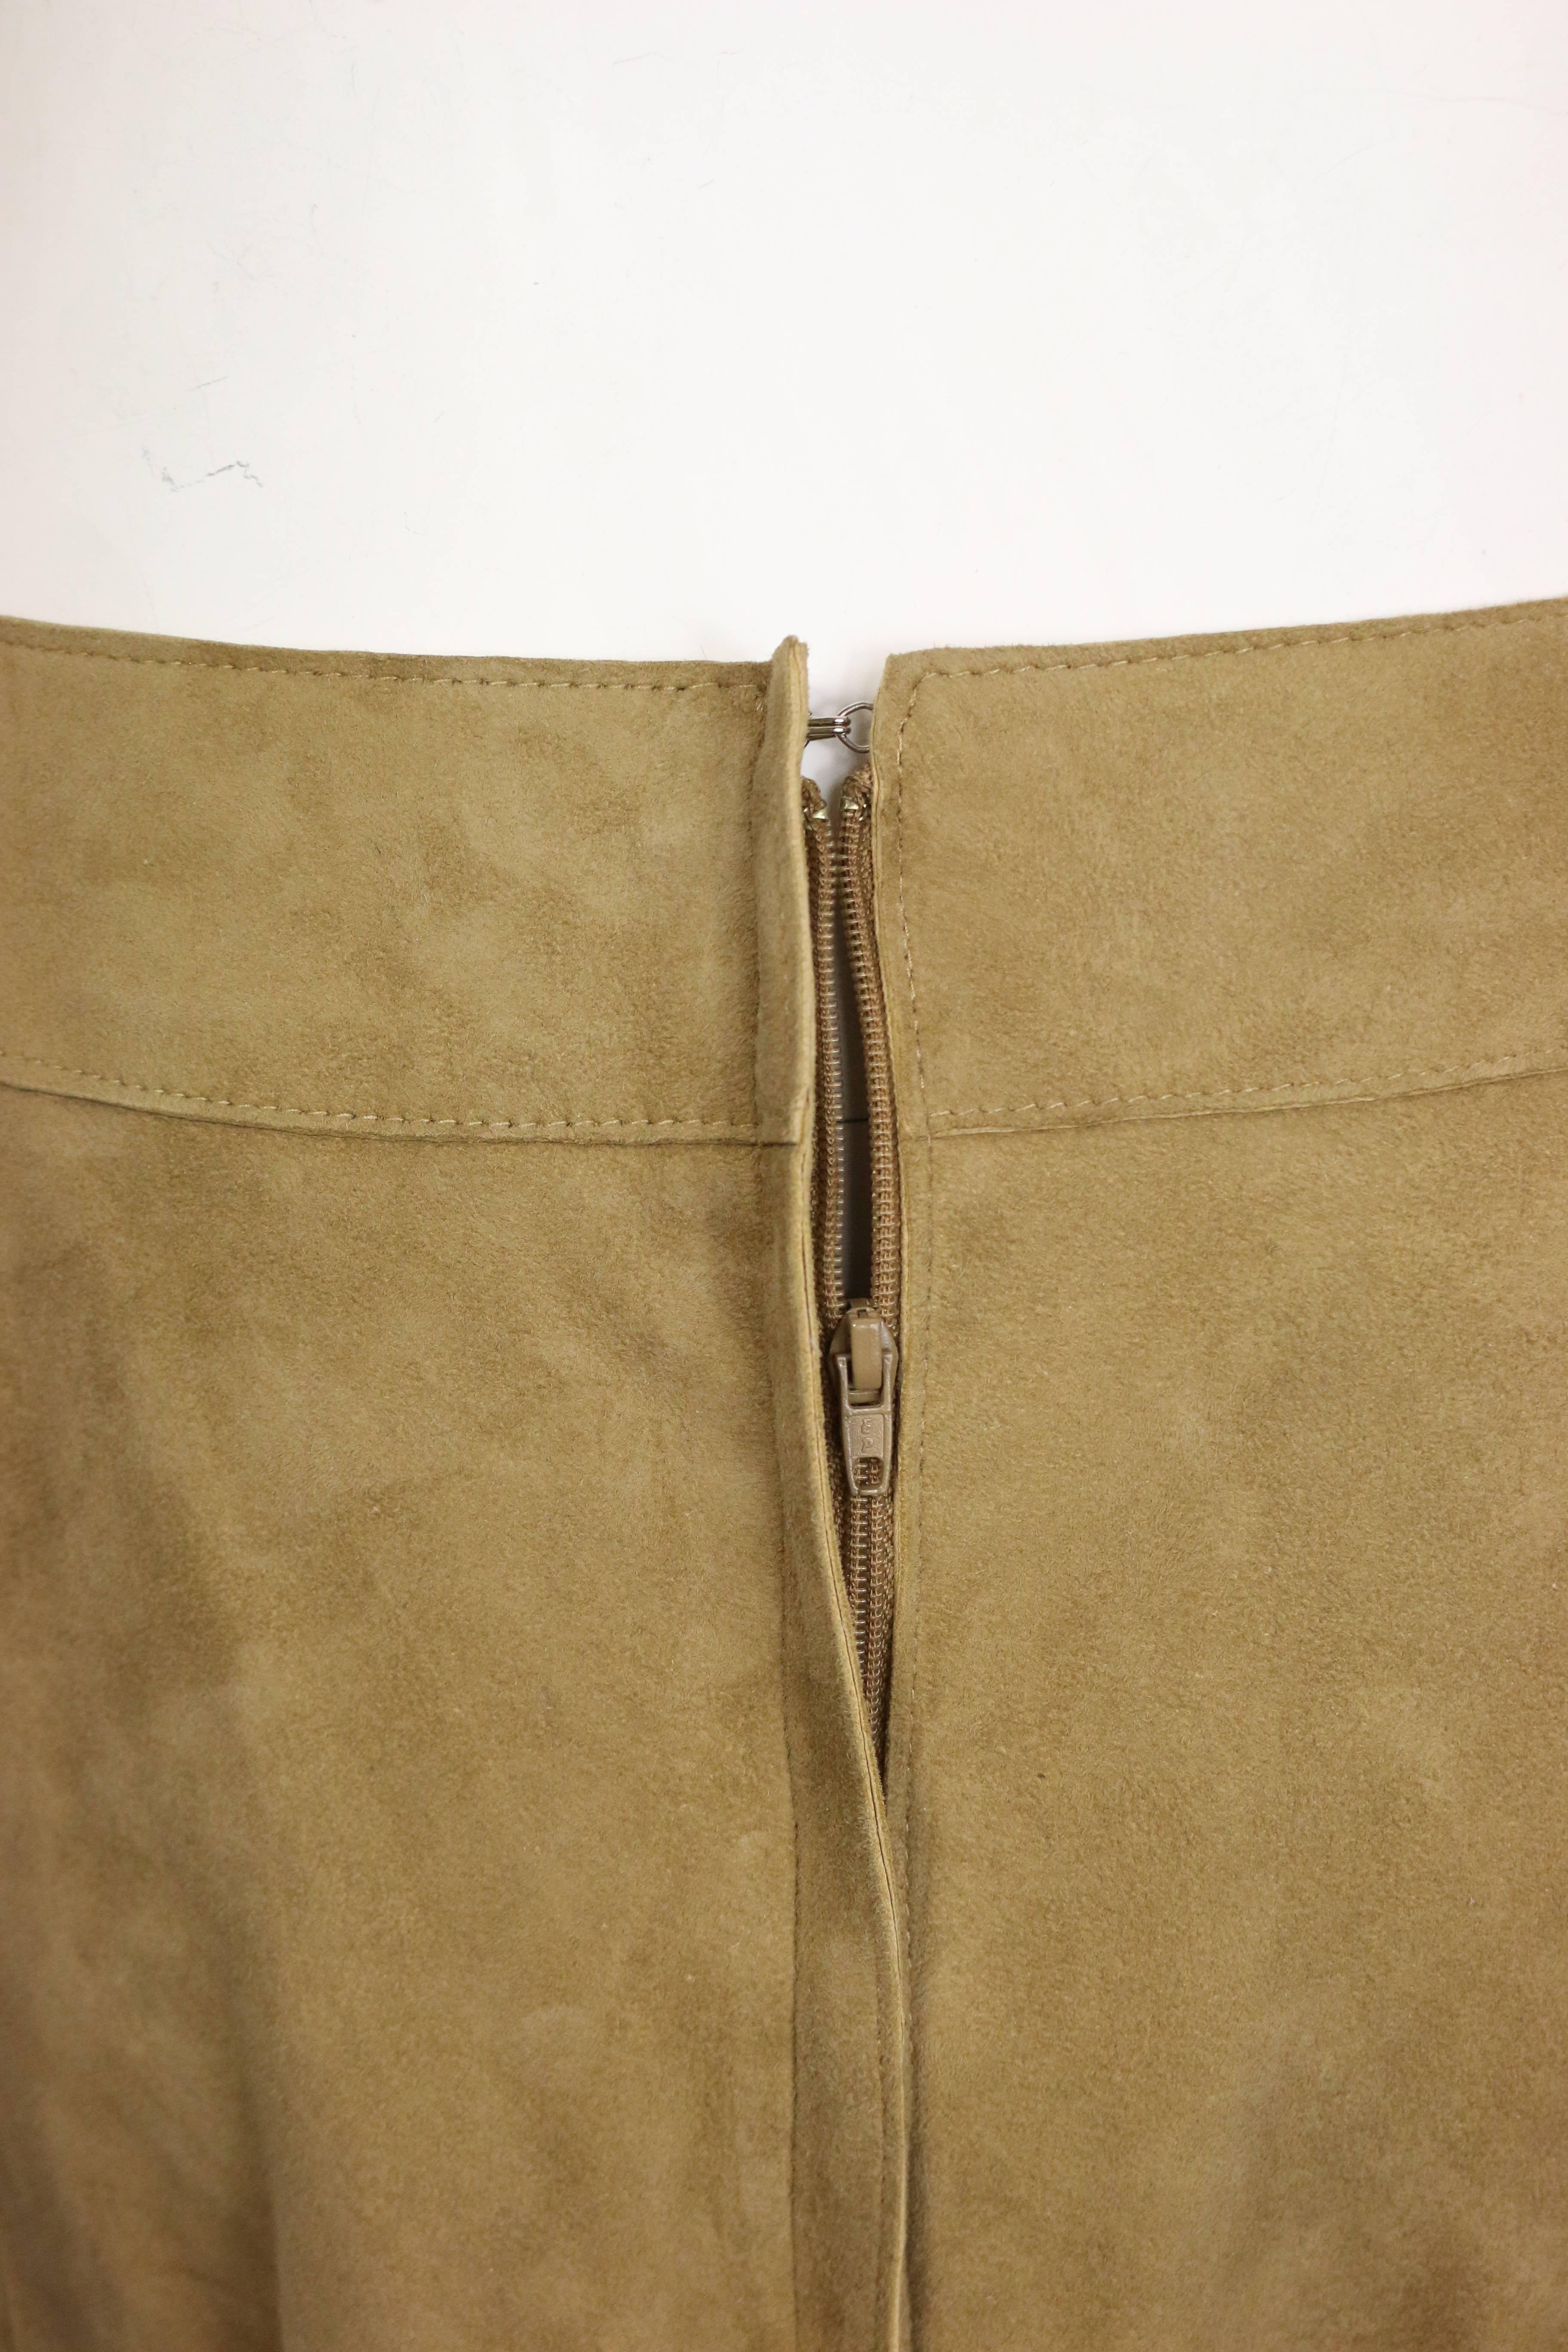 1999 Chanel Beige Suede Lambskin Leather Knee Length Pencil Skirt  In Good Condition For Sale In Sheung Wan, HK